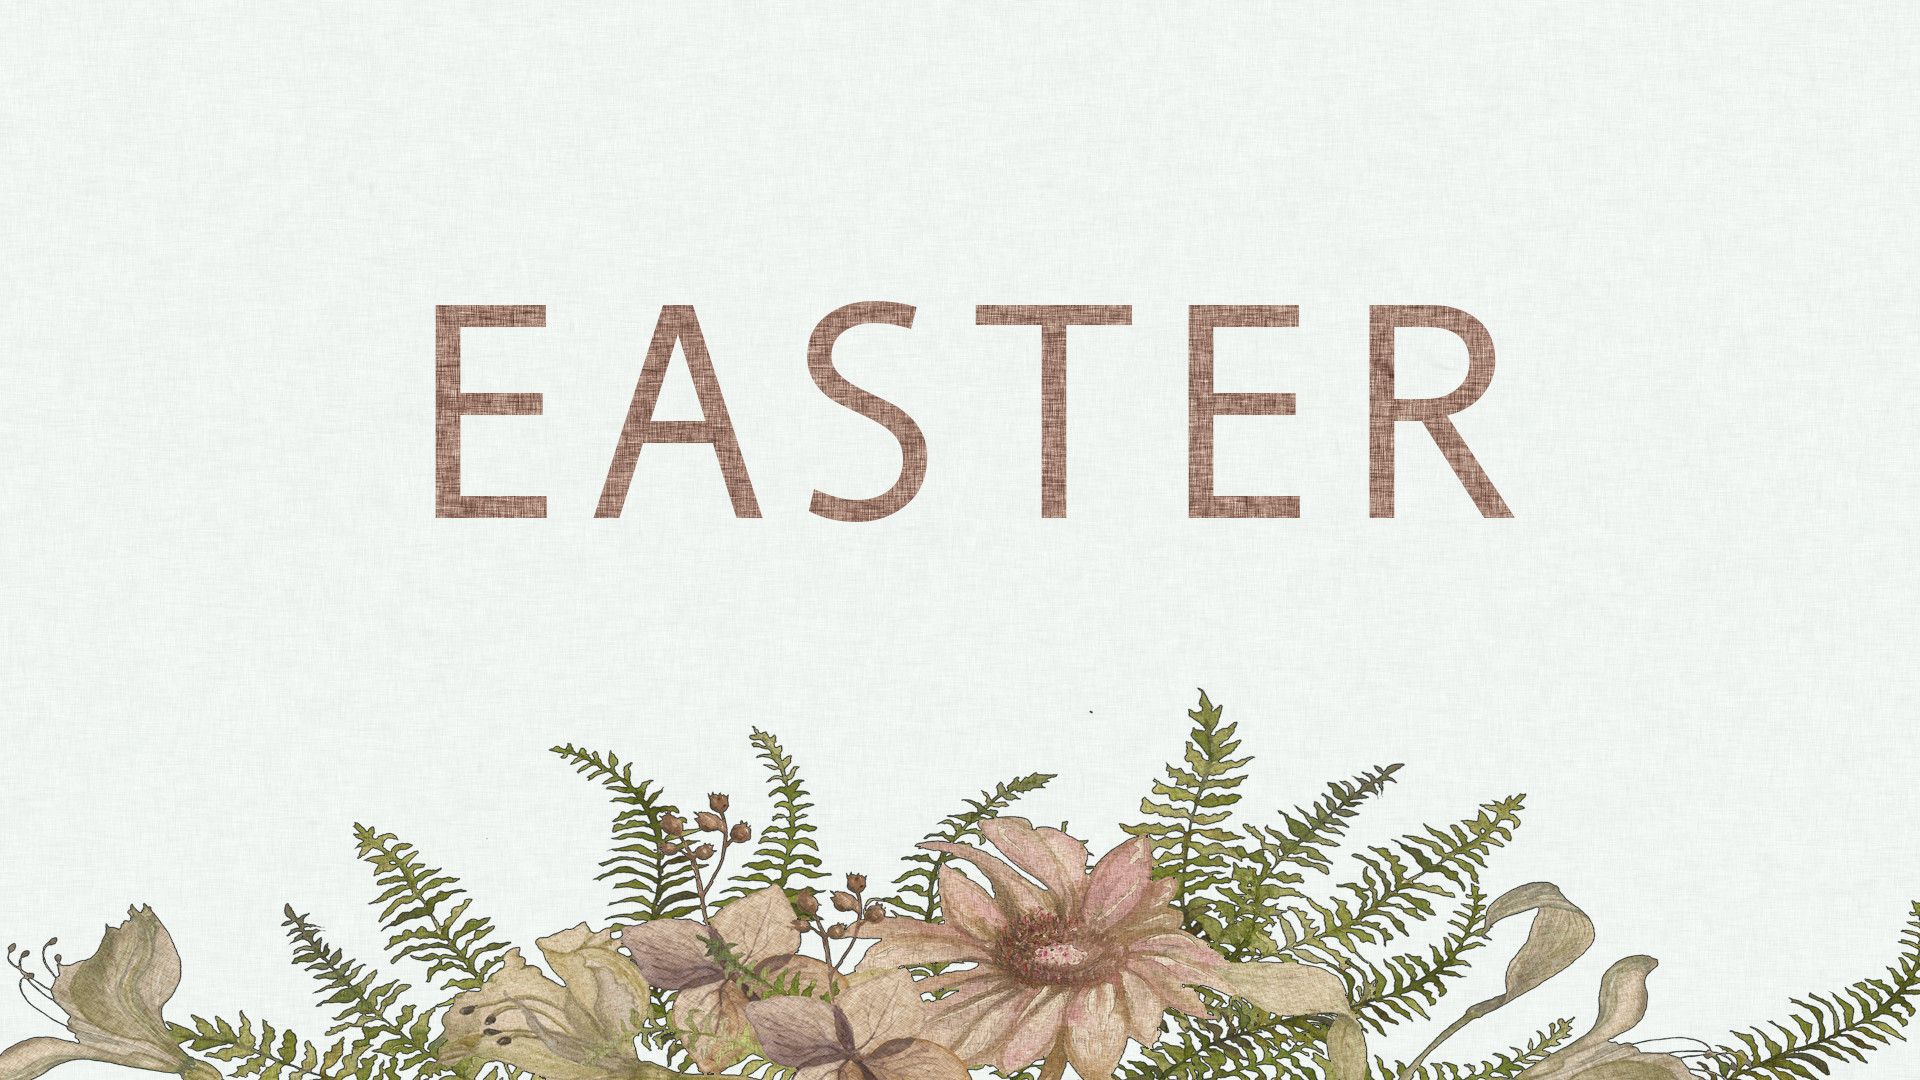 Palm sunday wallpaper with quotes Easter sunday wallpaper